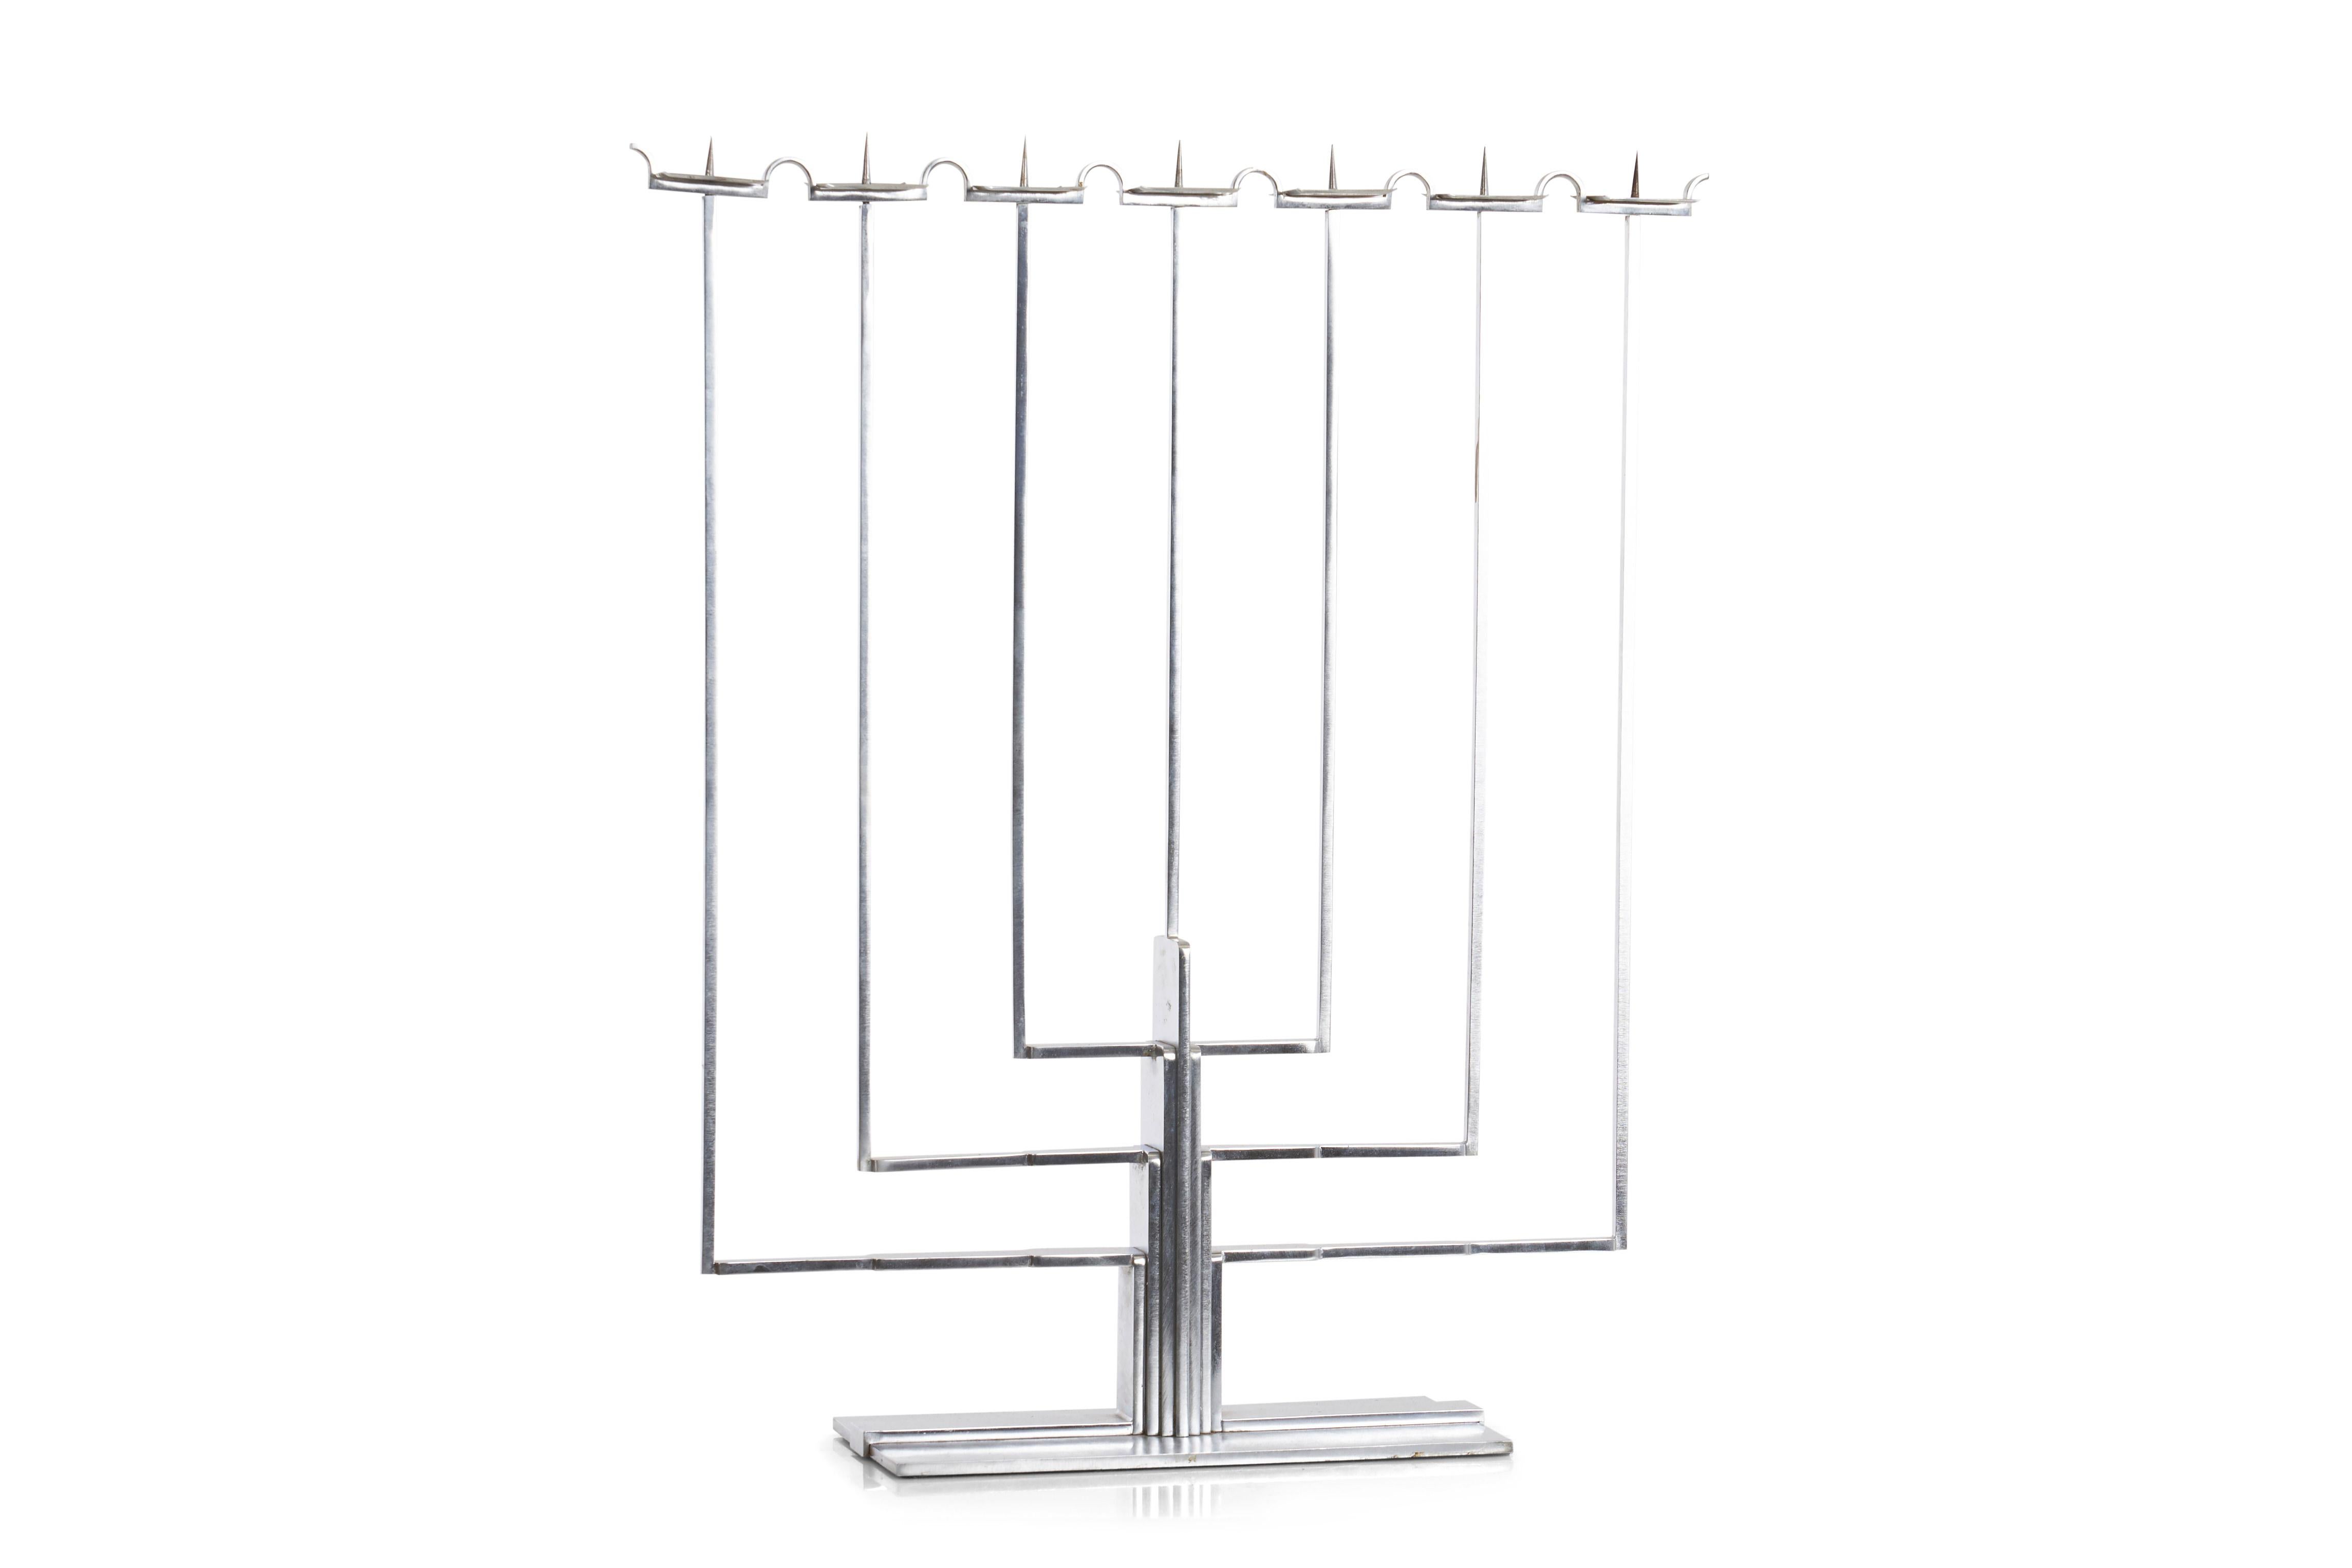 This candelabrum in nickel-plated brass was designed by Swanson in 1935 for the interior of Gordon Menselssohn's home in Bloomfield Hills, Michigan. Over a decade later, Swanson, his wife, Pipsan Saarinen Swanson, and Eliel Saarinen created the